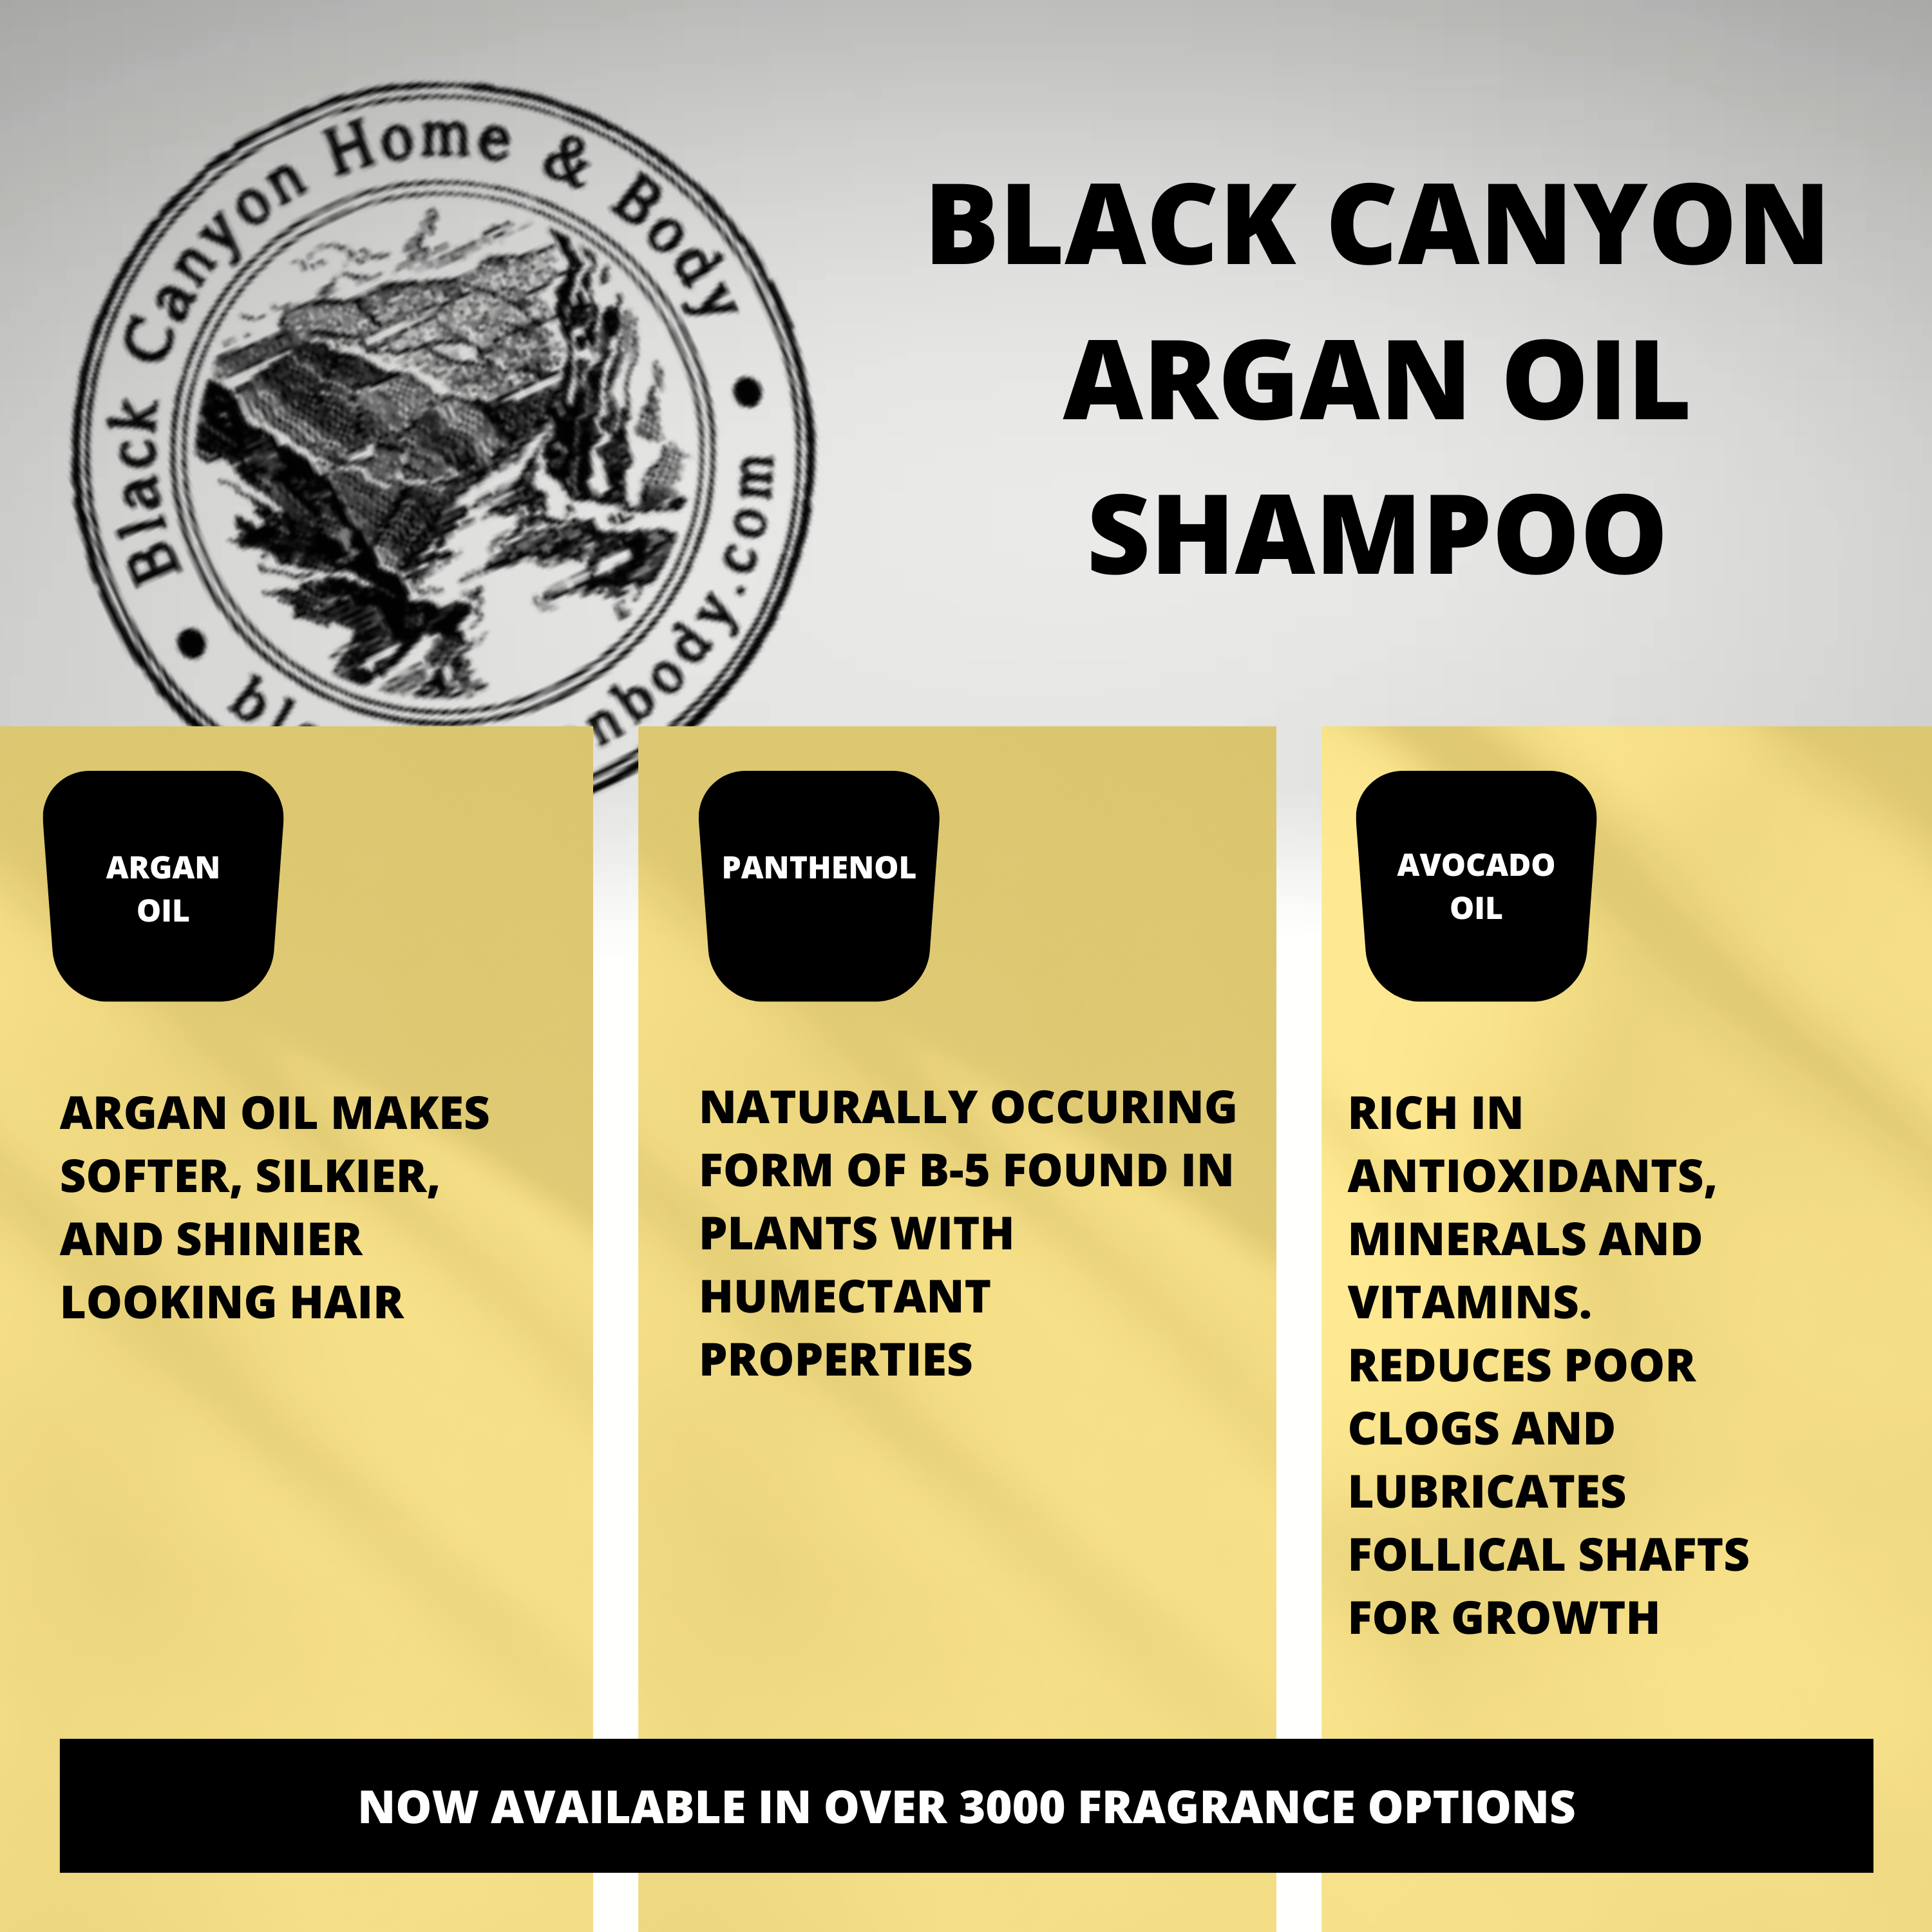 Black Canyon Night Blooming Jasmine Scented Shampoo with Argan Oil